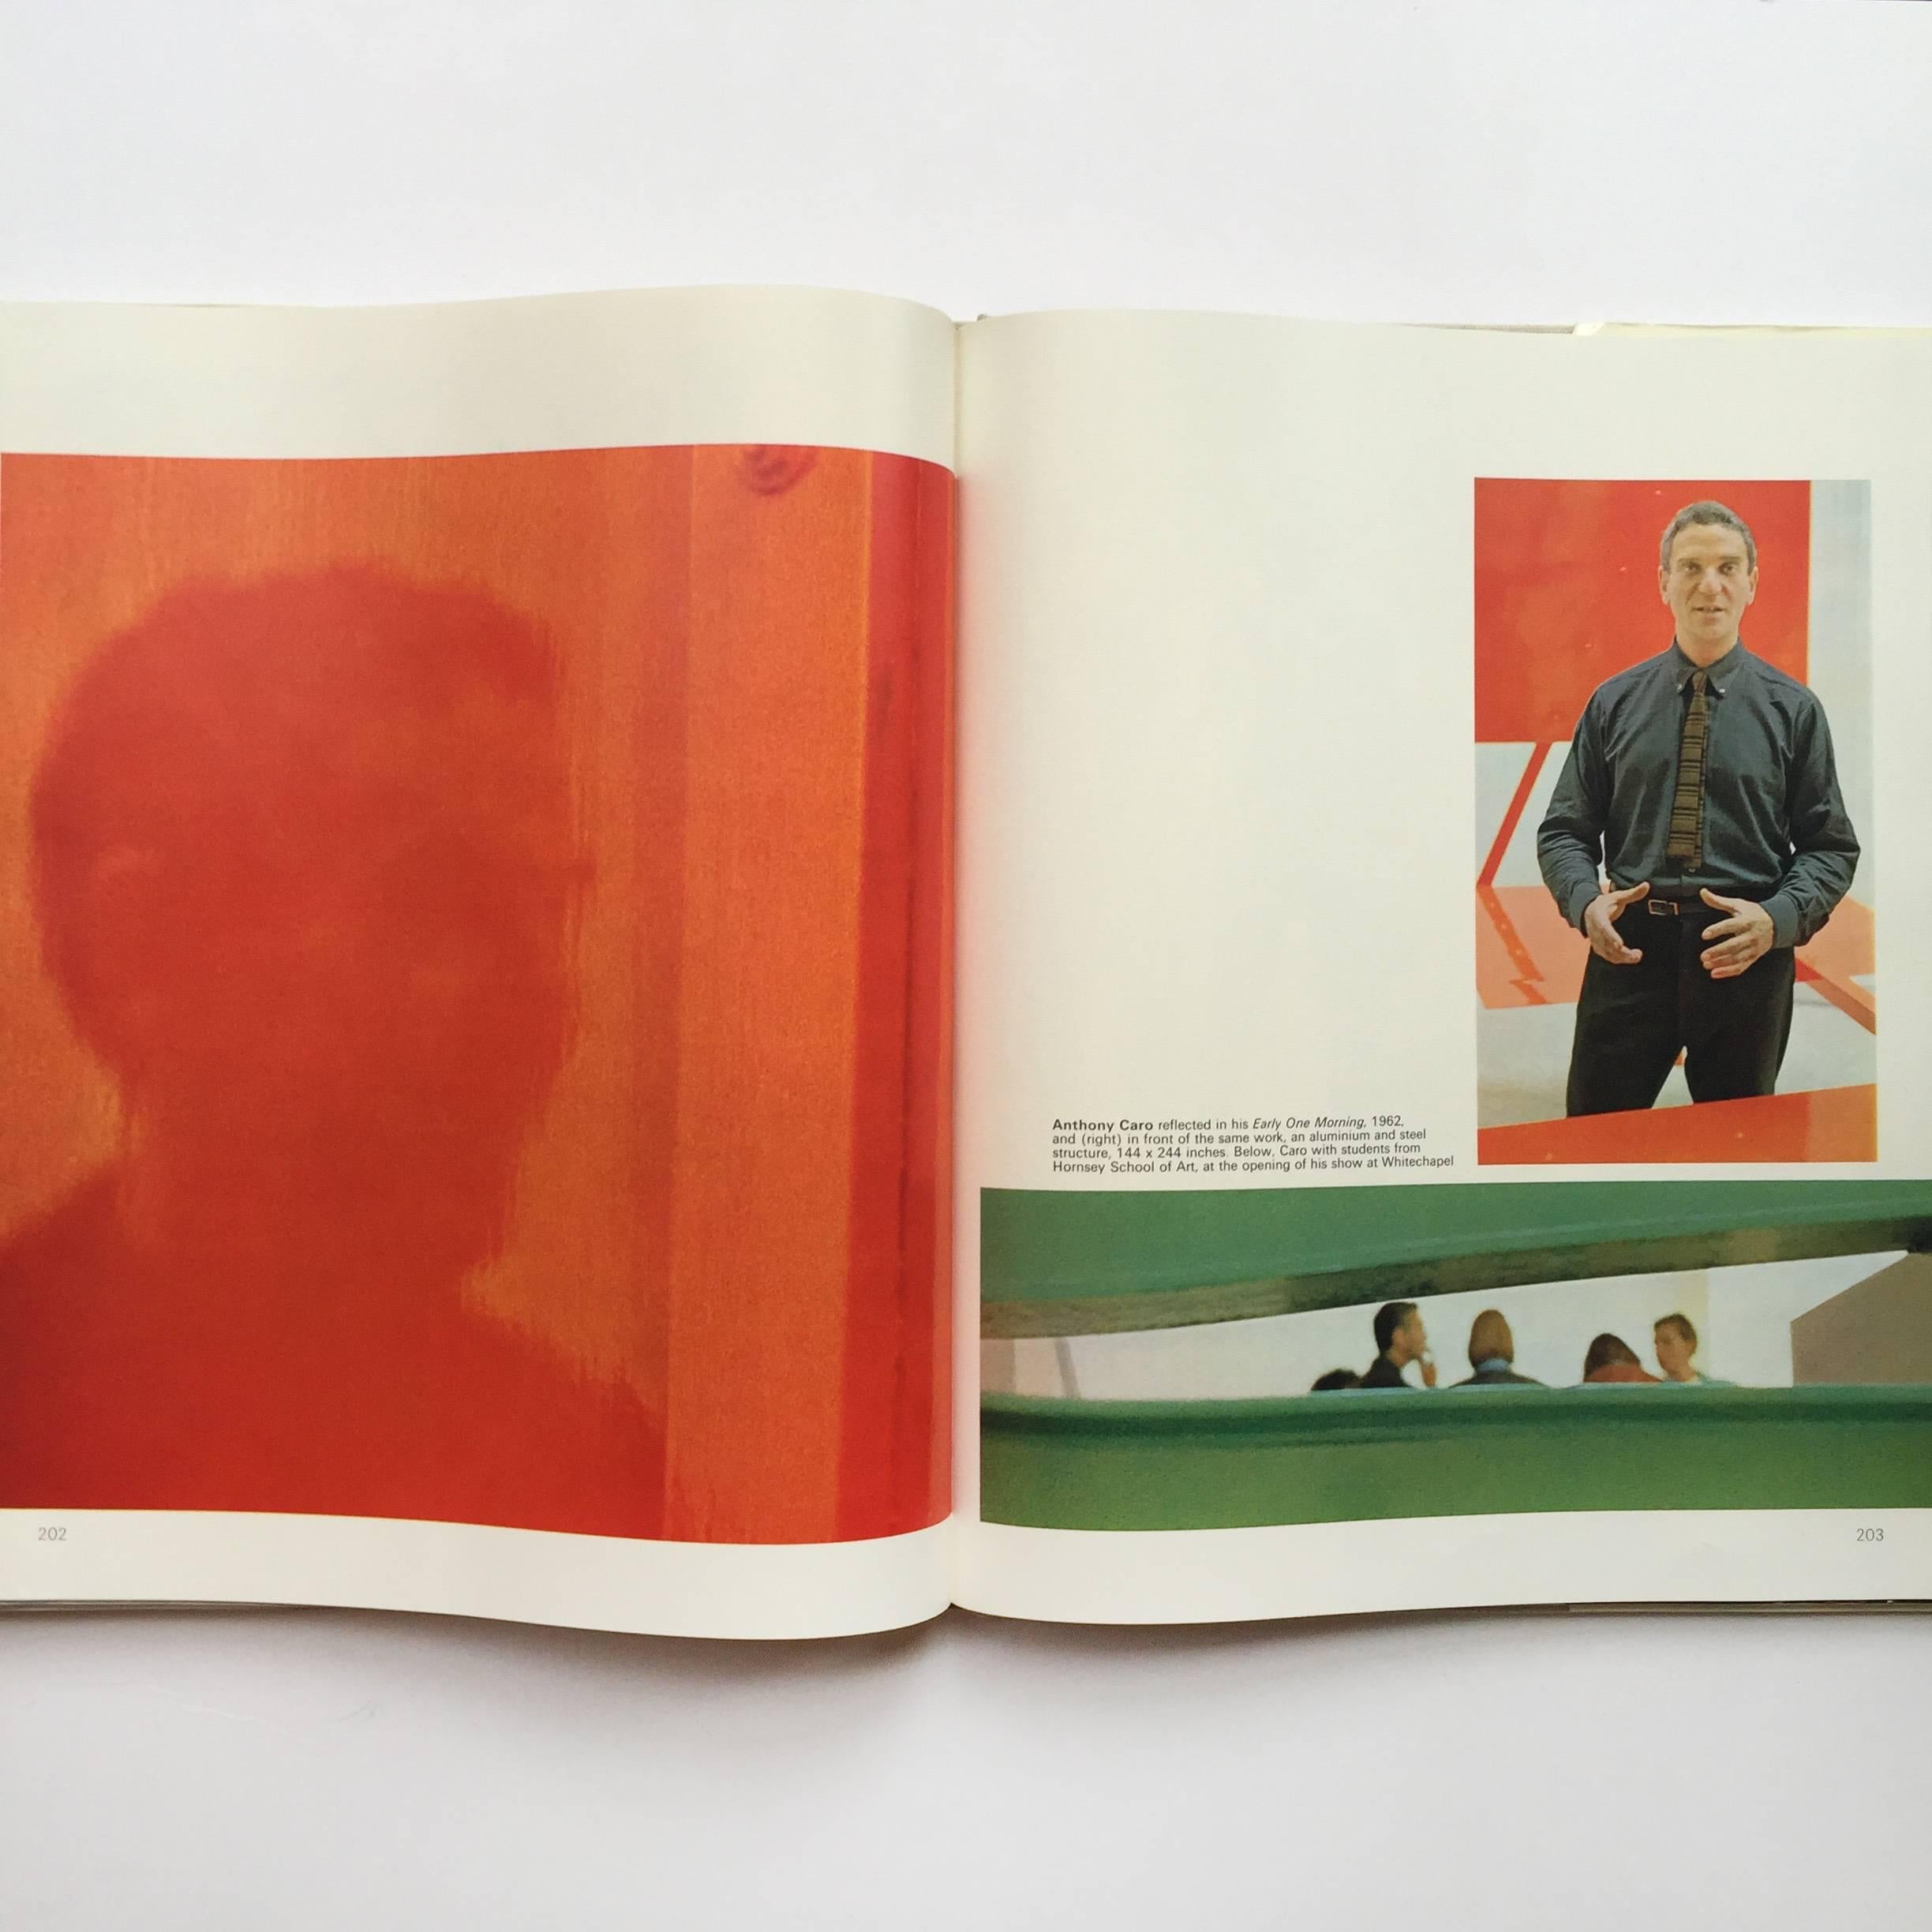 First edition, published by Thomas Nelson and Sons Ltd, London, 1965.

Private view is a strikingly important document of modern British art and key artists working in Britain during the 1960s. Page after page we are greeted with incredibly